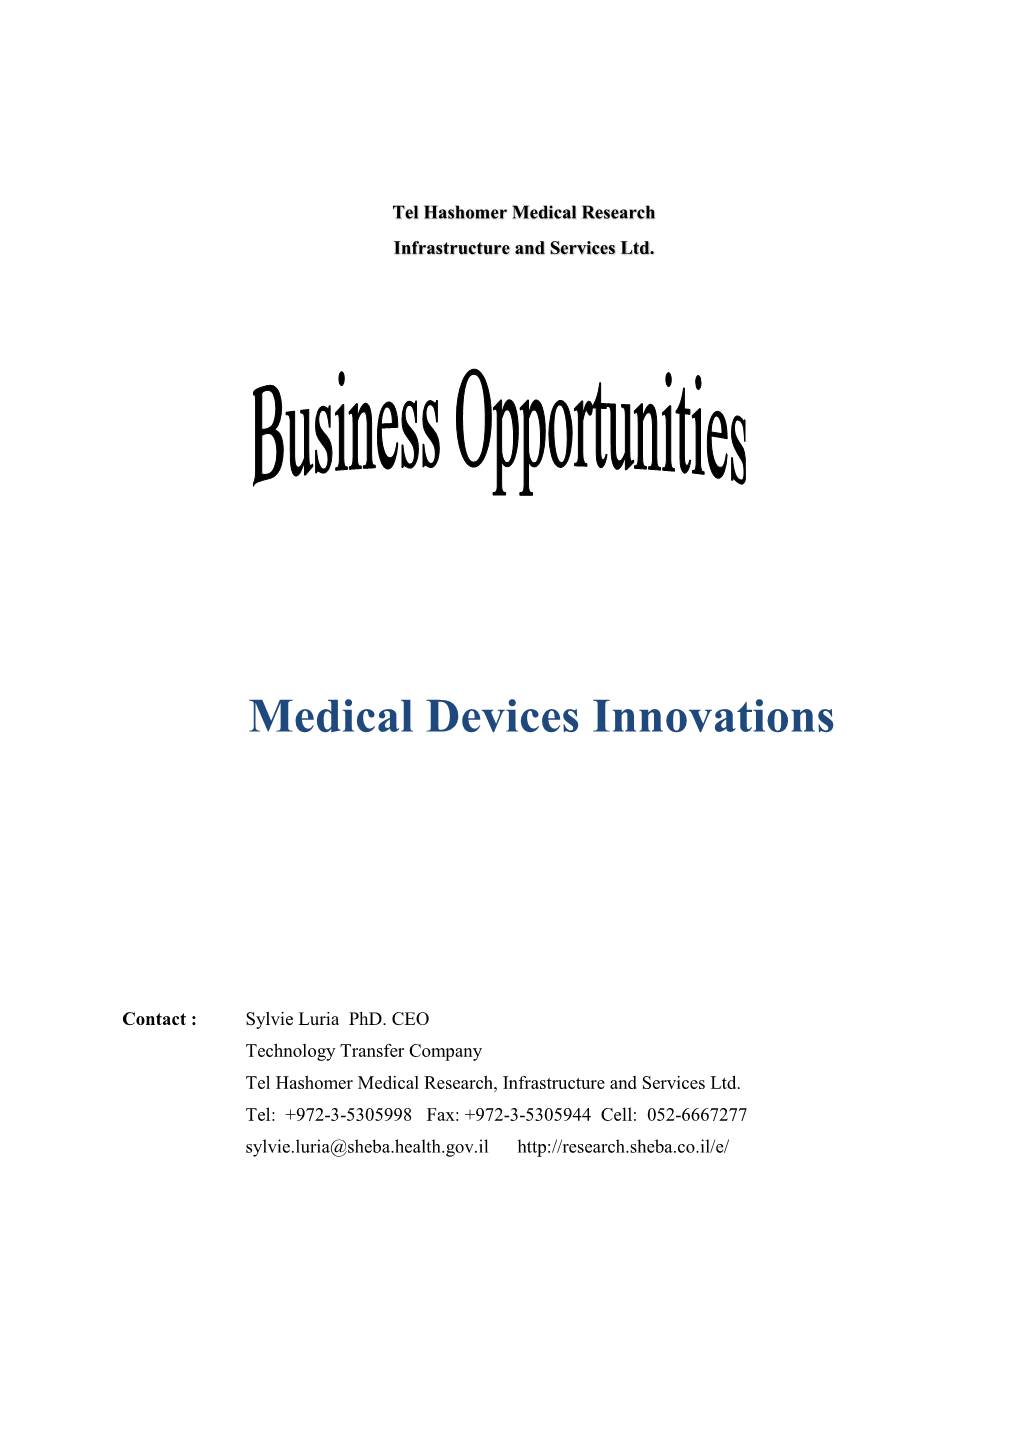 Medical Devices Innovations